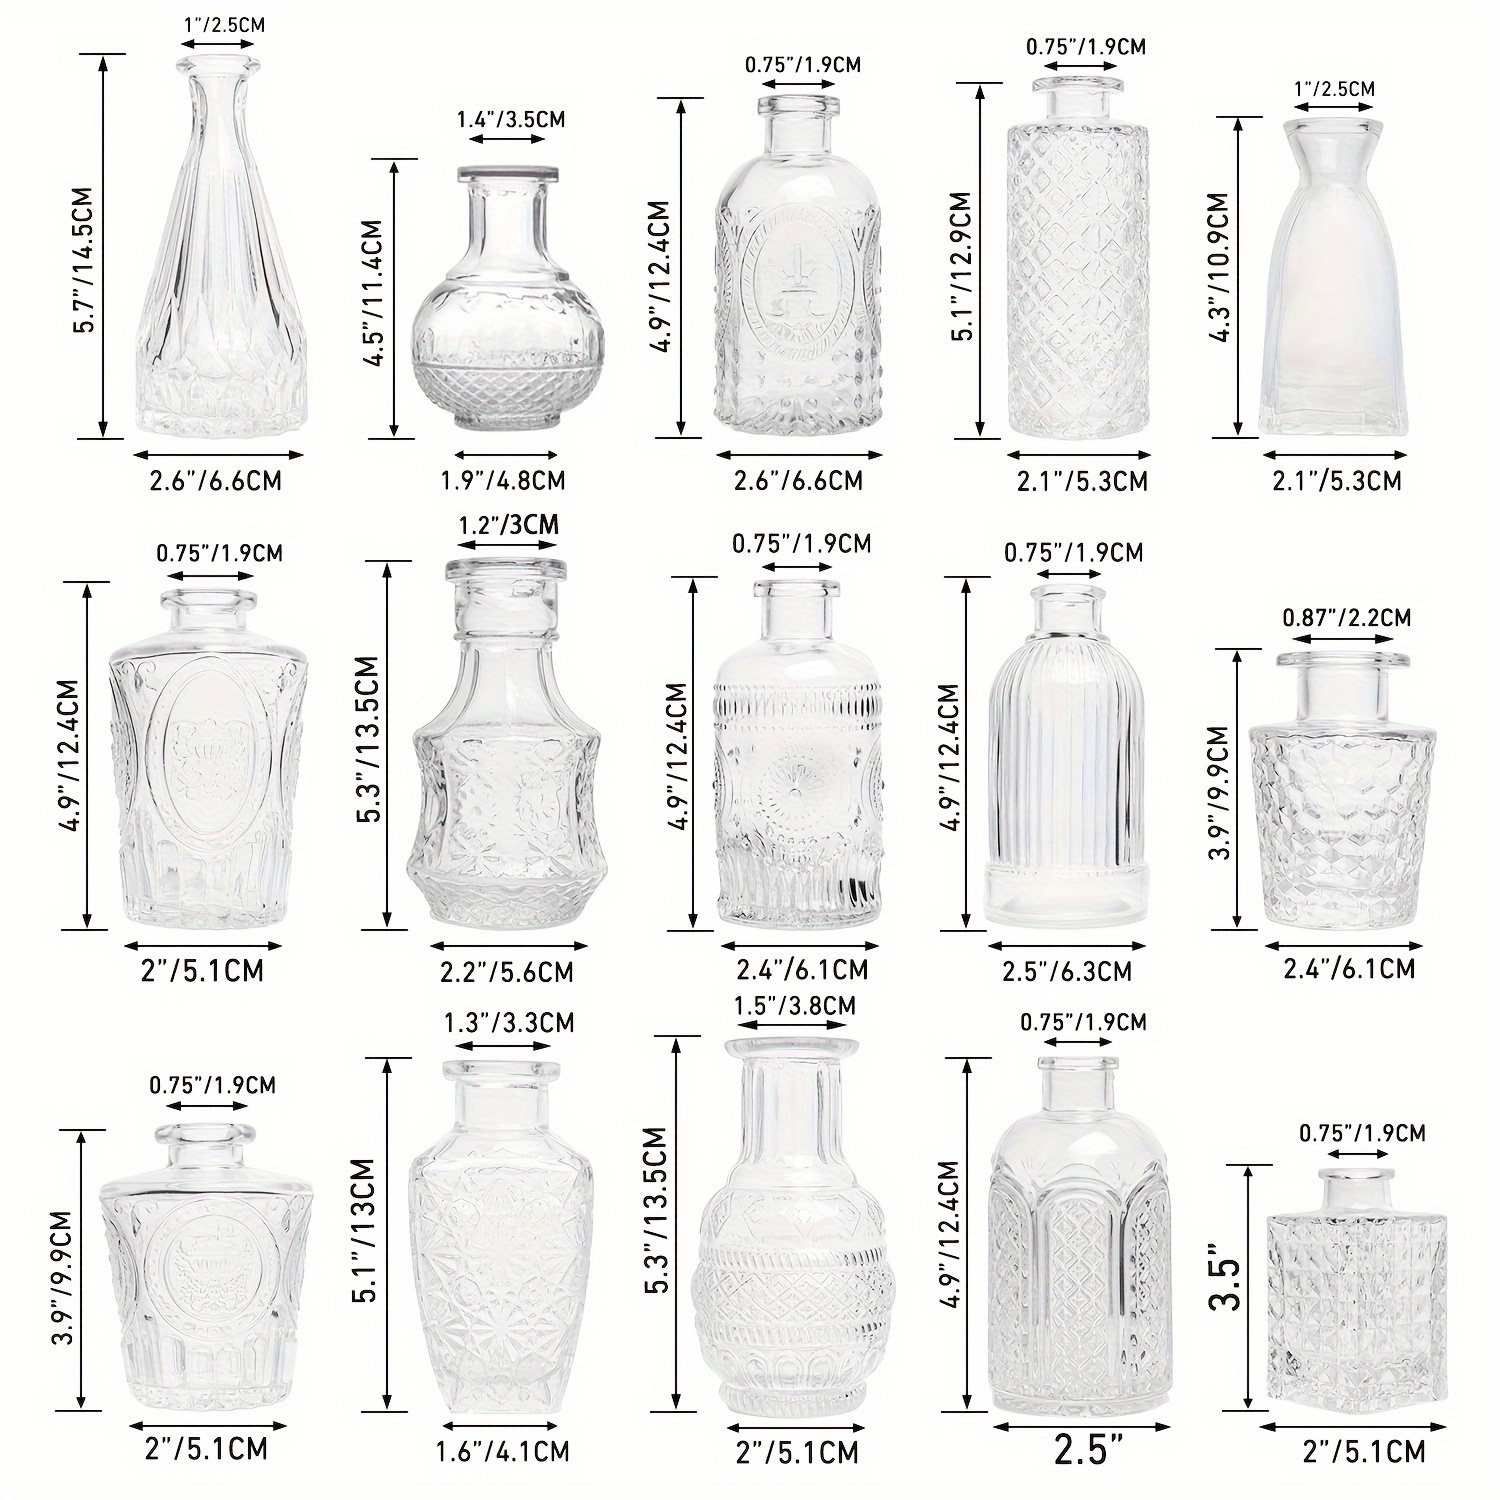 Buy Glass Bud Vase Set of 22, Small Vases for Flowers, Clear Glass Vases  for Centerpieces, Mini Bud Vases in Bulk Rustic Wedding Decorations,  Centerpieces, Vintage Look Home Table Flower Decor Online